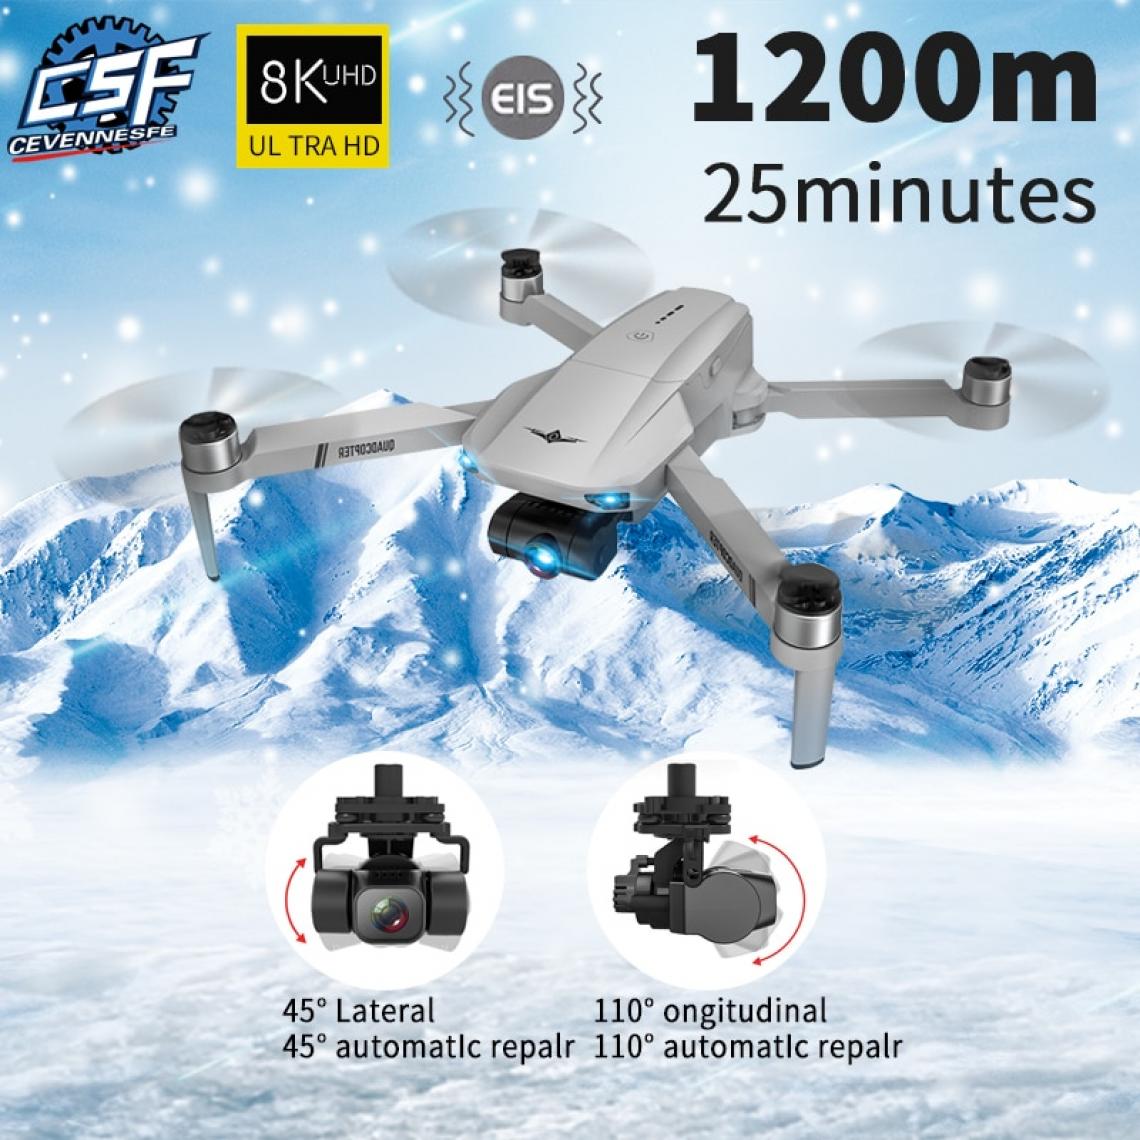 Universal - KF102 Drone 8K HD Camera GPS Professional 1200 m Image Transmission Quadcopter pliable RC Dron VE58 E520 | RC Helicopter(Gris) - Drone